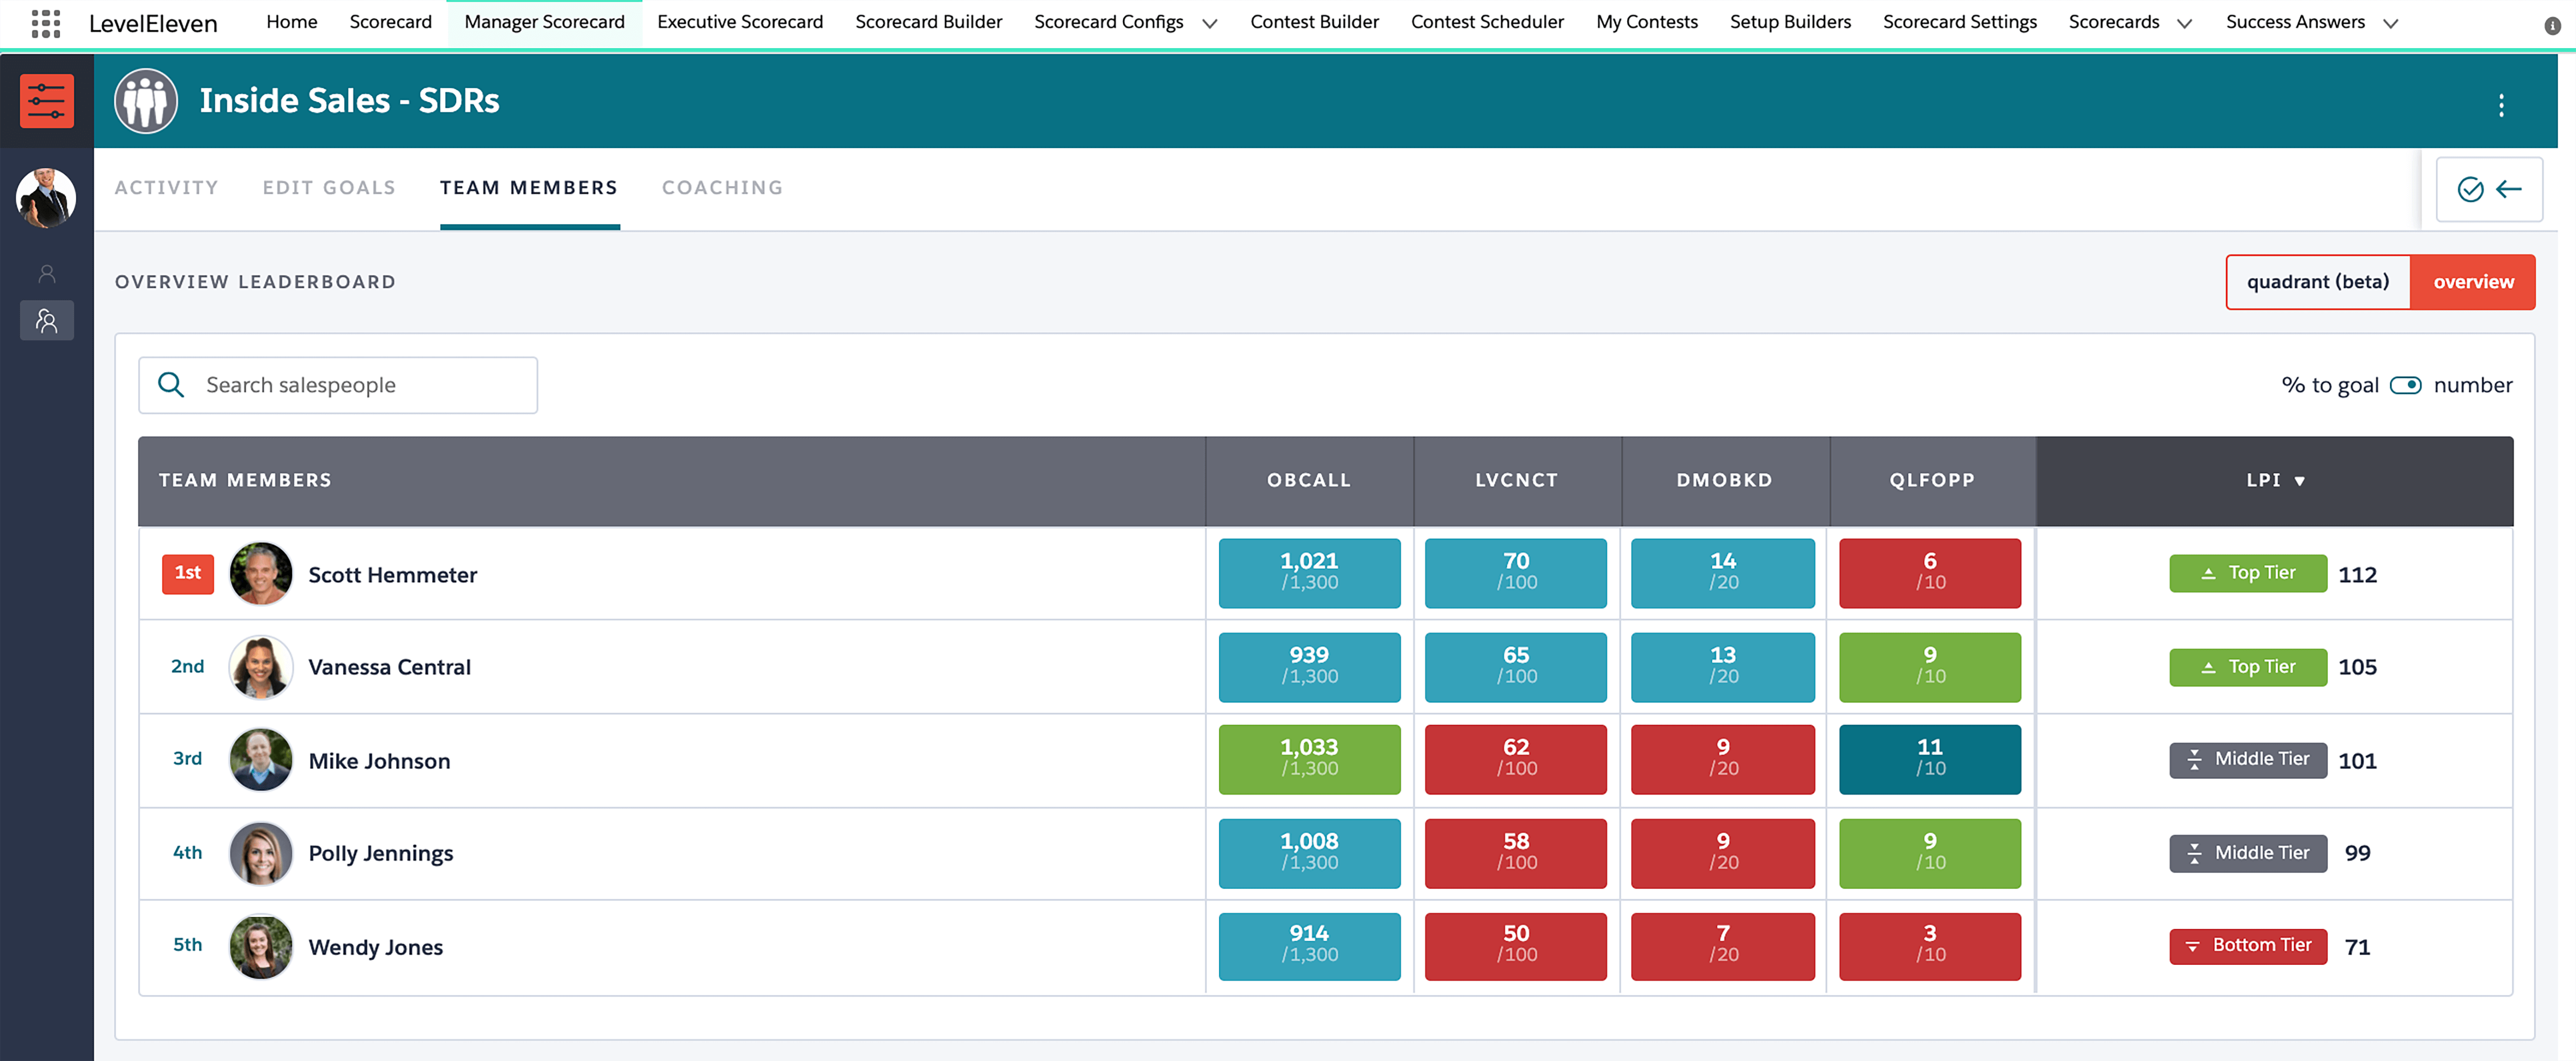 CRM is not enough - leaderboard-manager-scorecard-UI